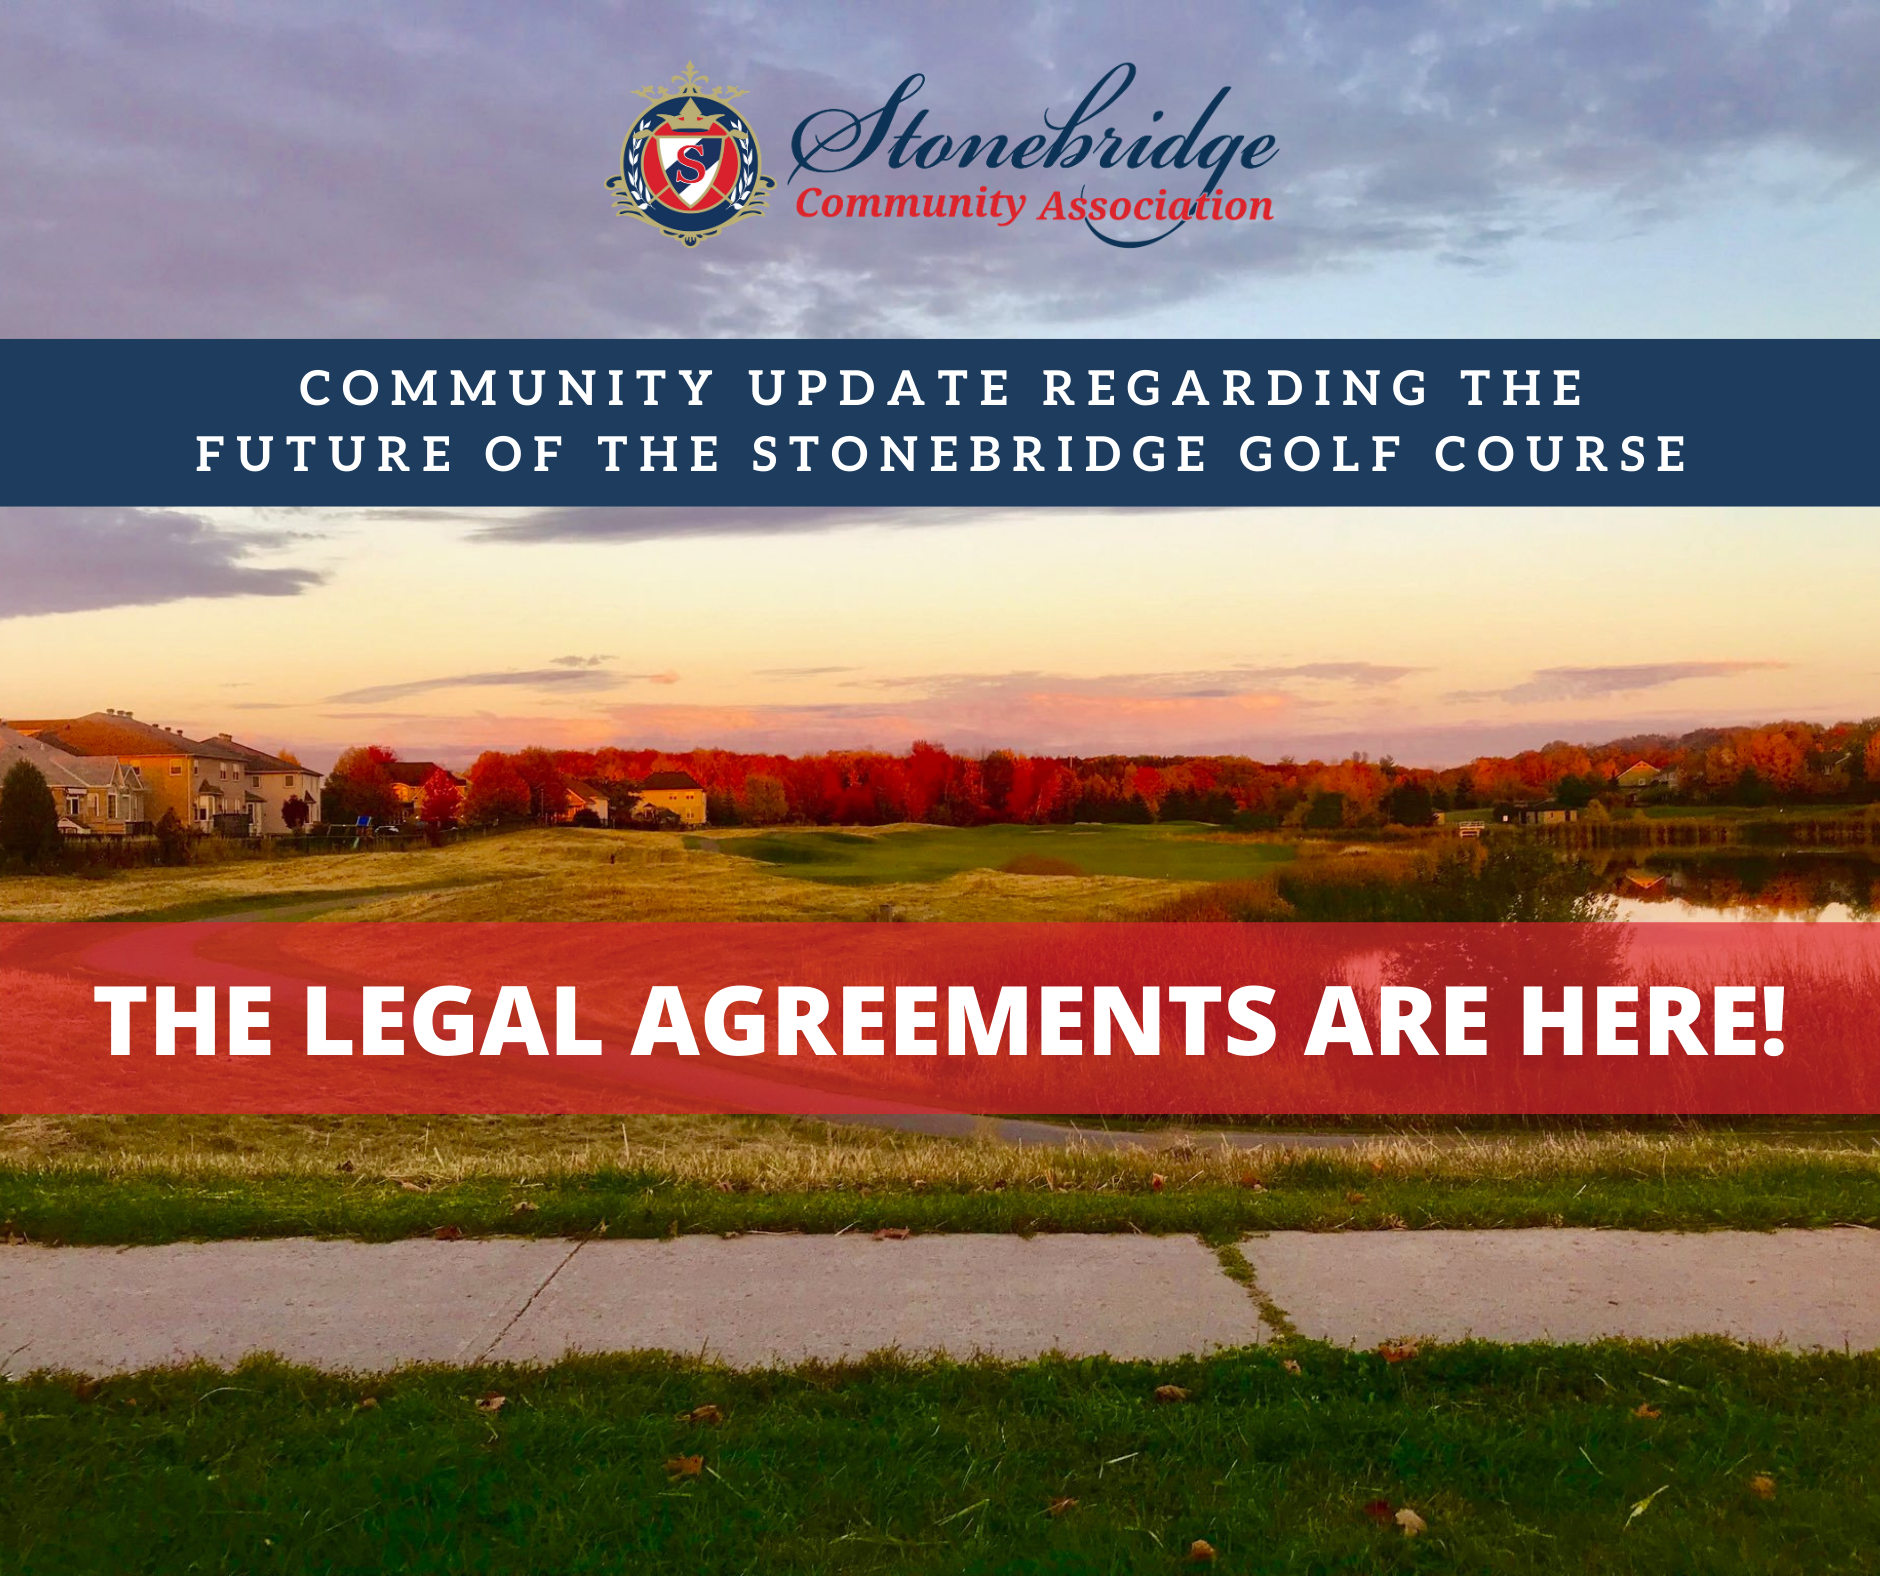 The Stonebridge Legal Agreements have been Signed